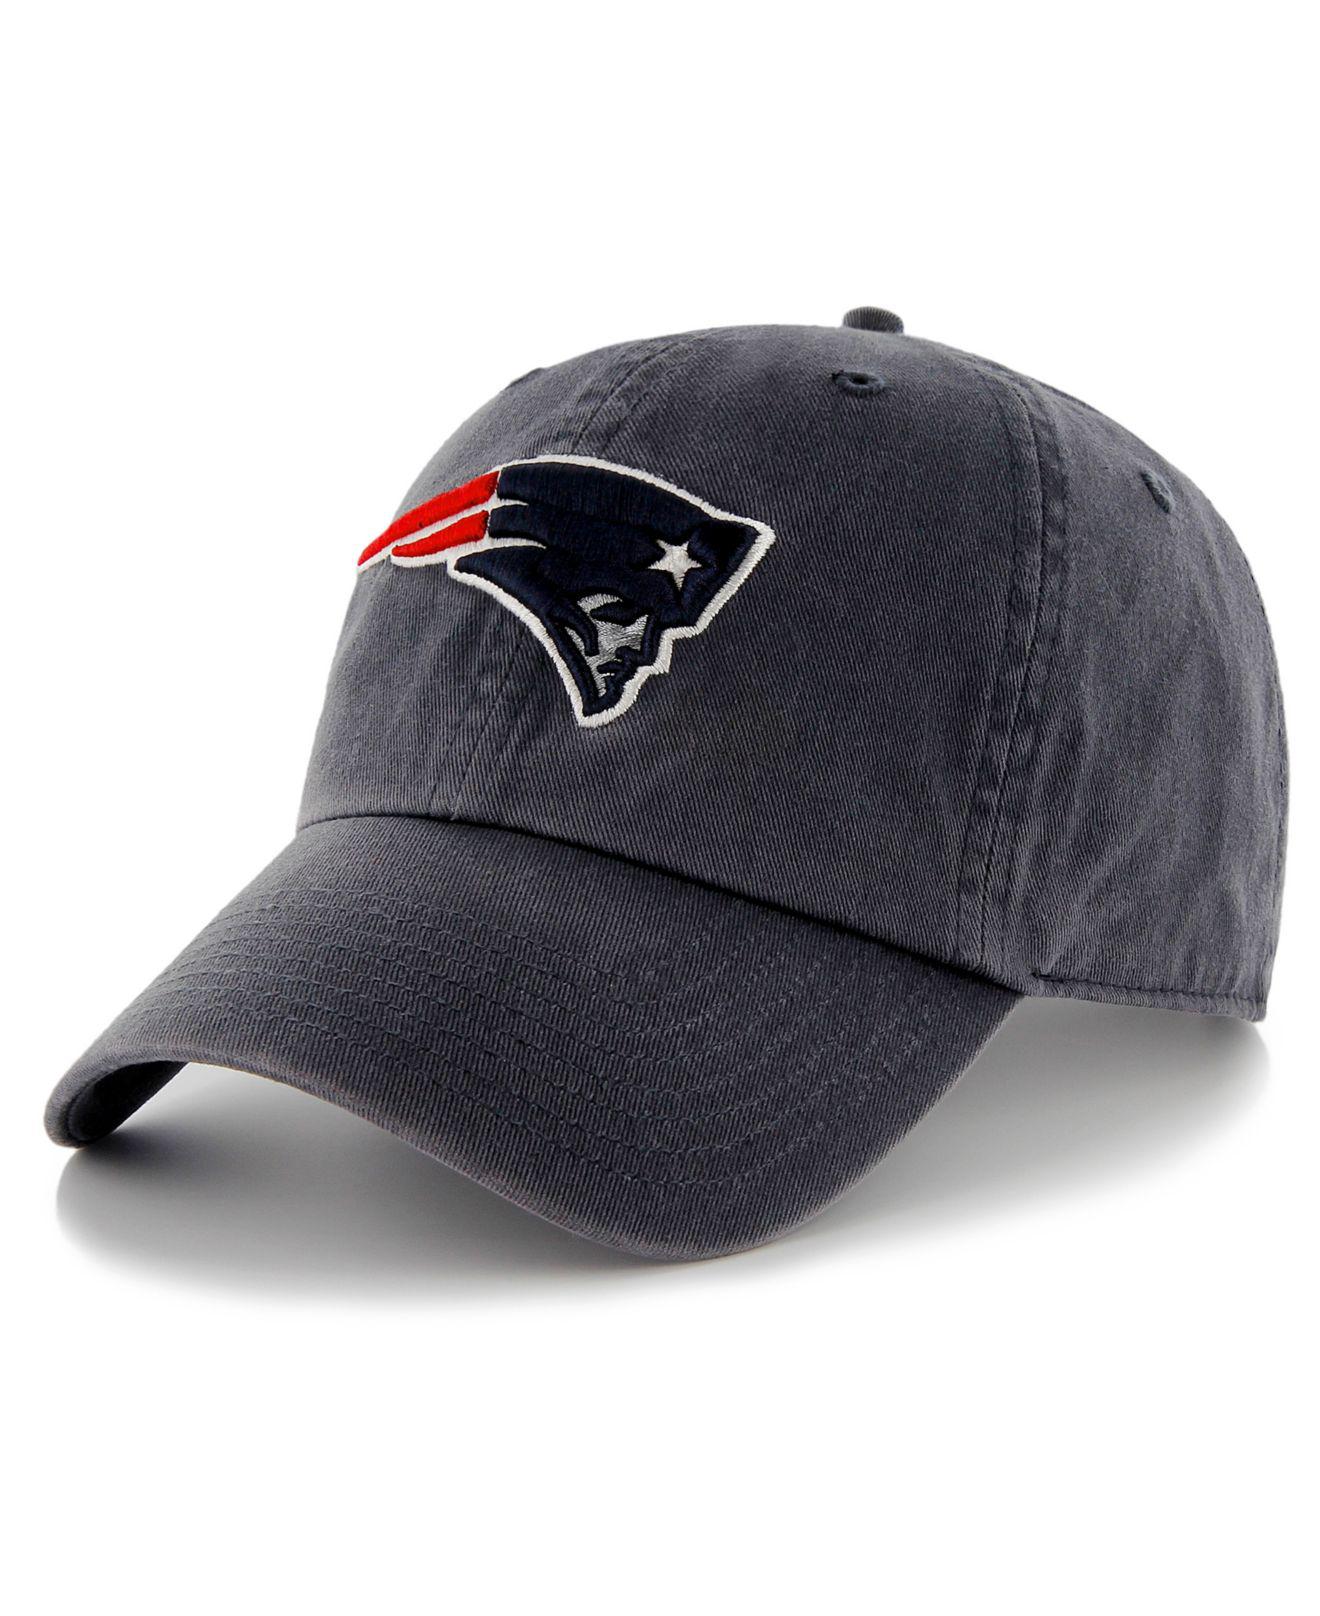 Lyst - 47 Brand New England Patriots Franchise Hat in Blue for Men